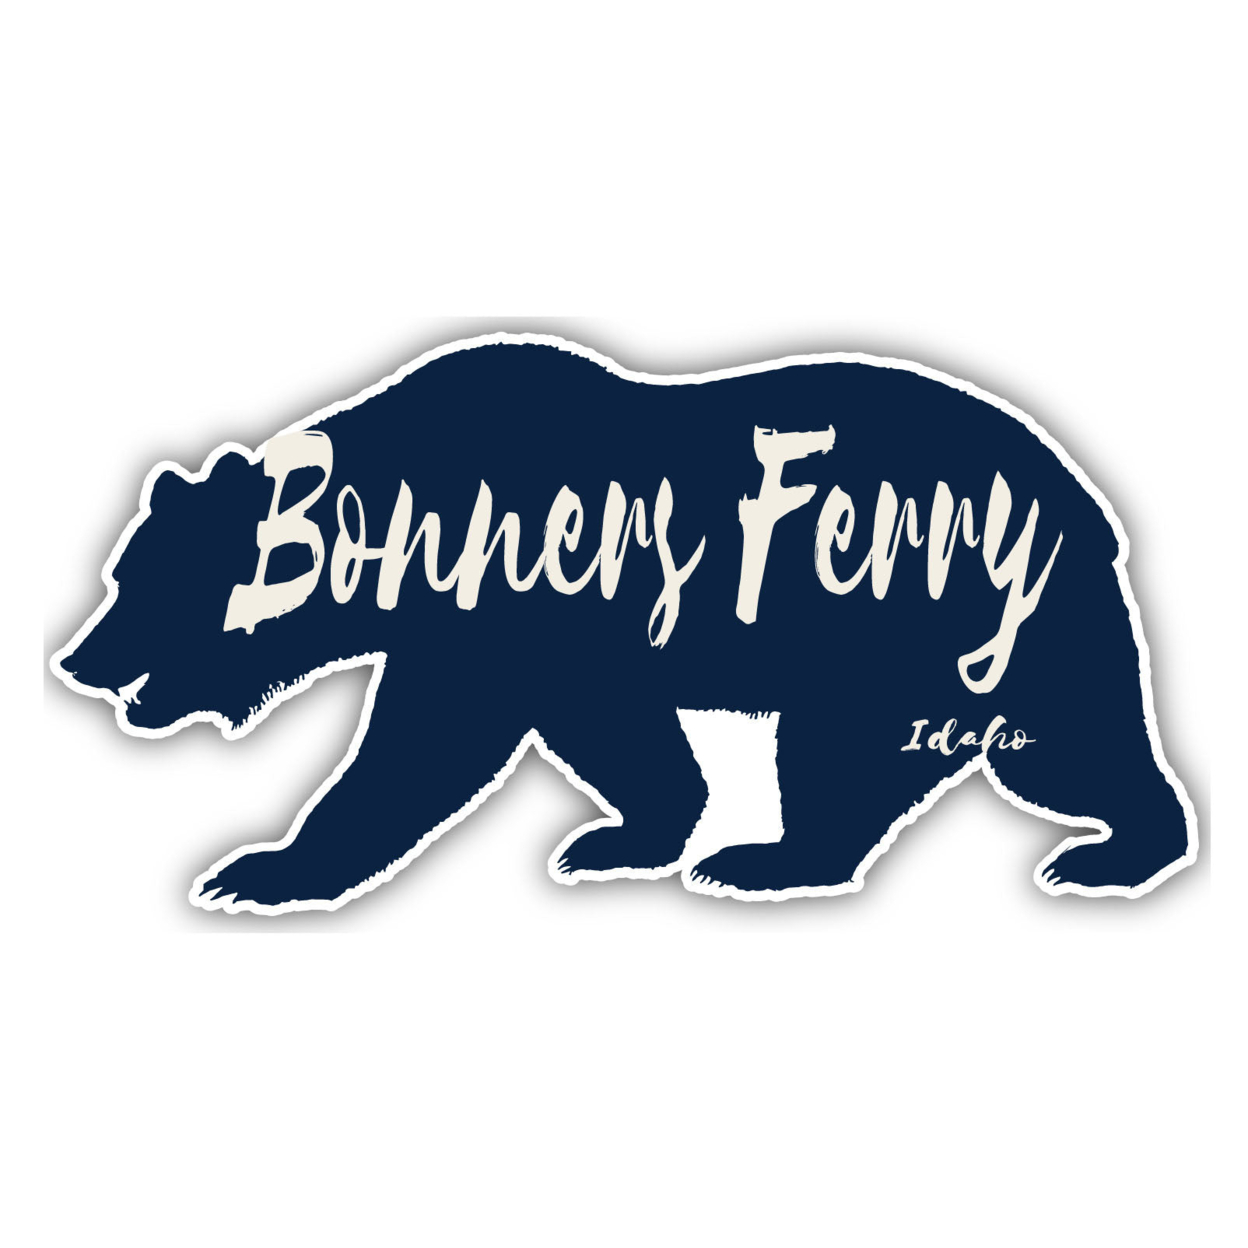 Bonners Ferry Idaho Souvenir Decorative Stickers (Choose Theme And Size) - 4-Pack, 4-Inch, Bear